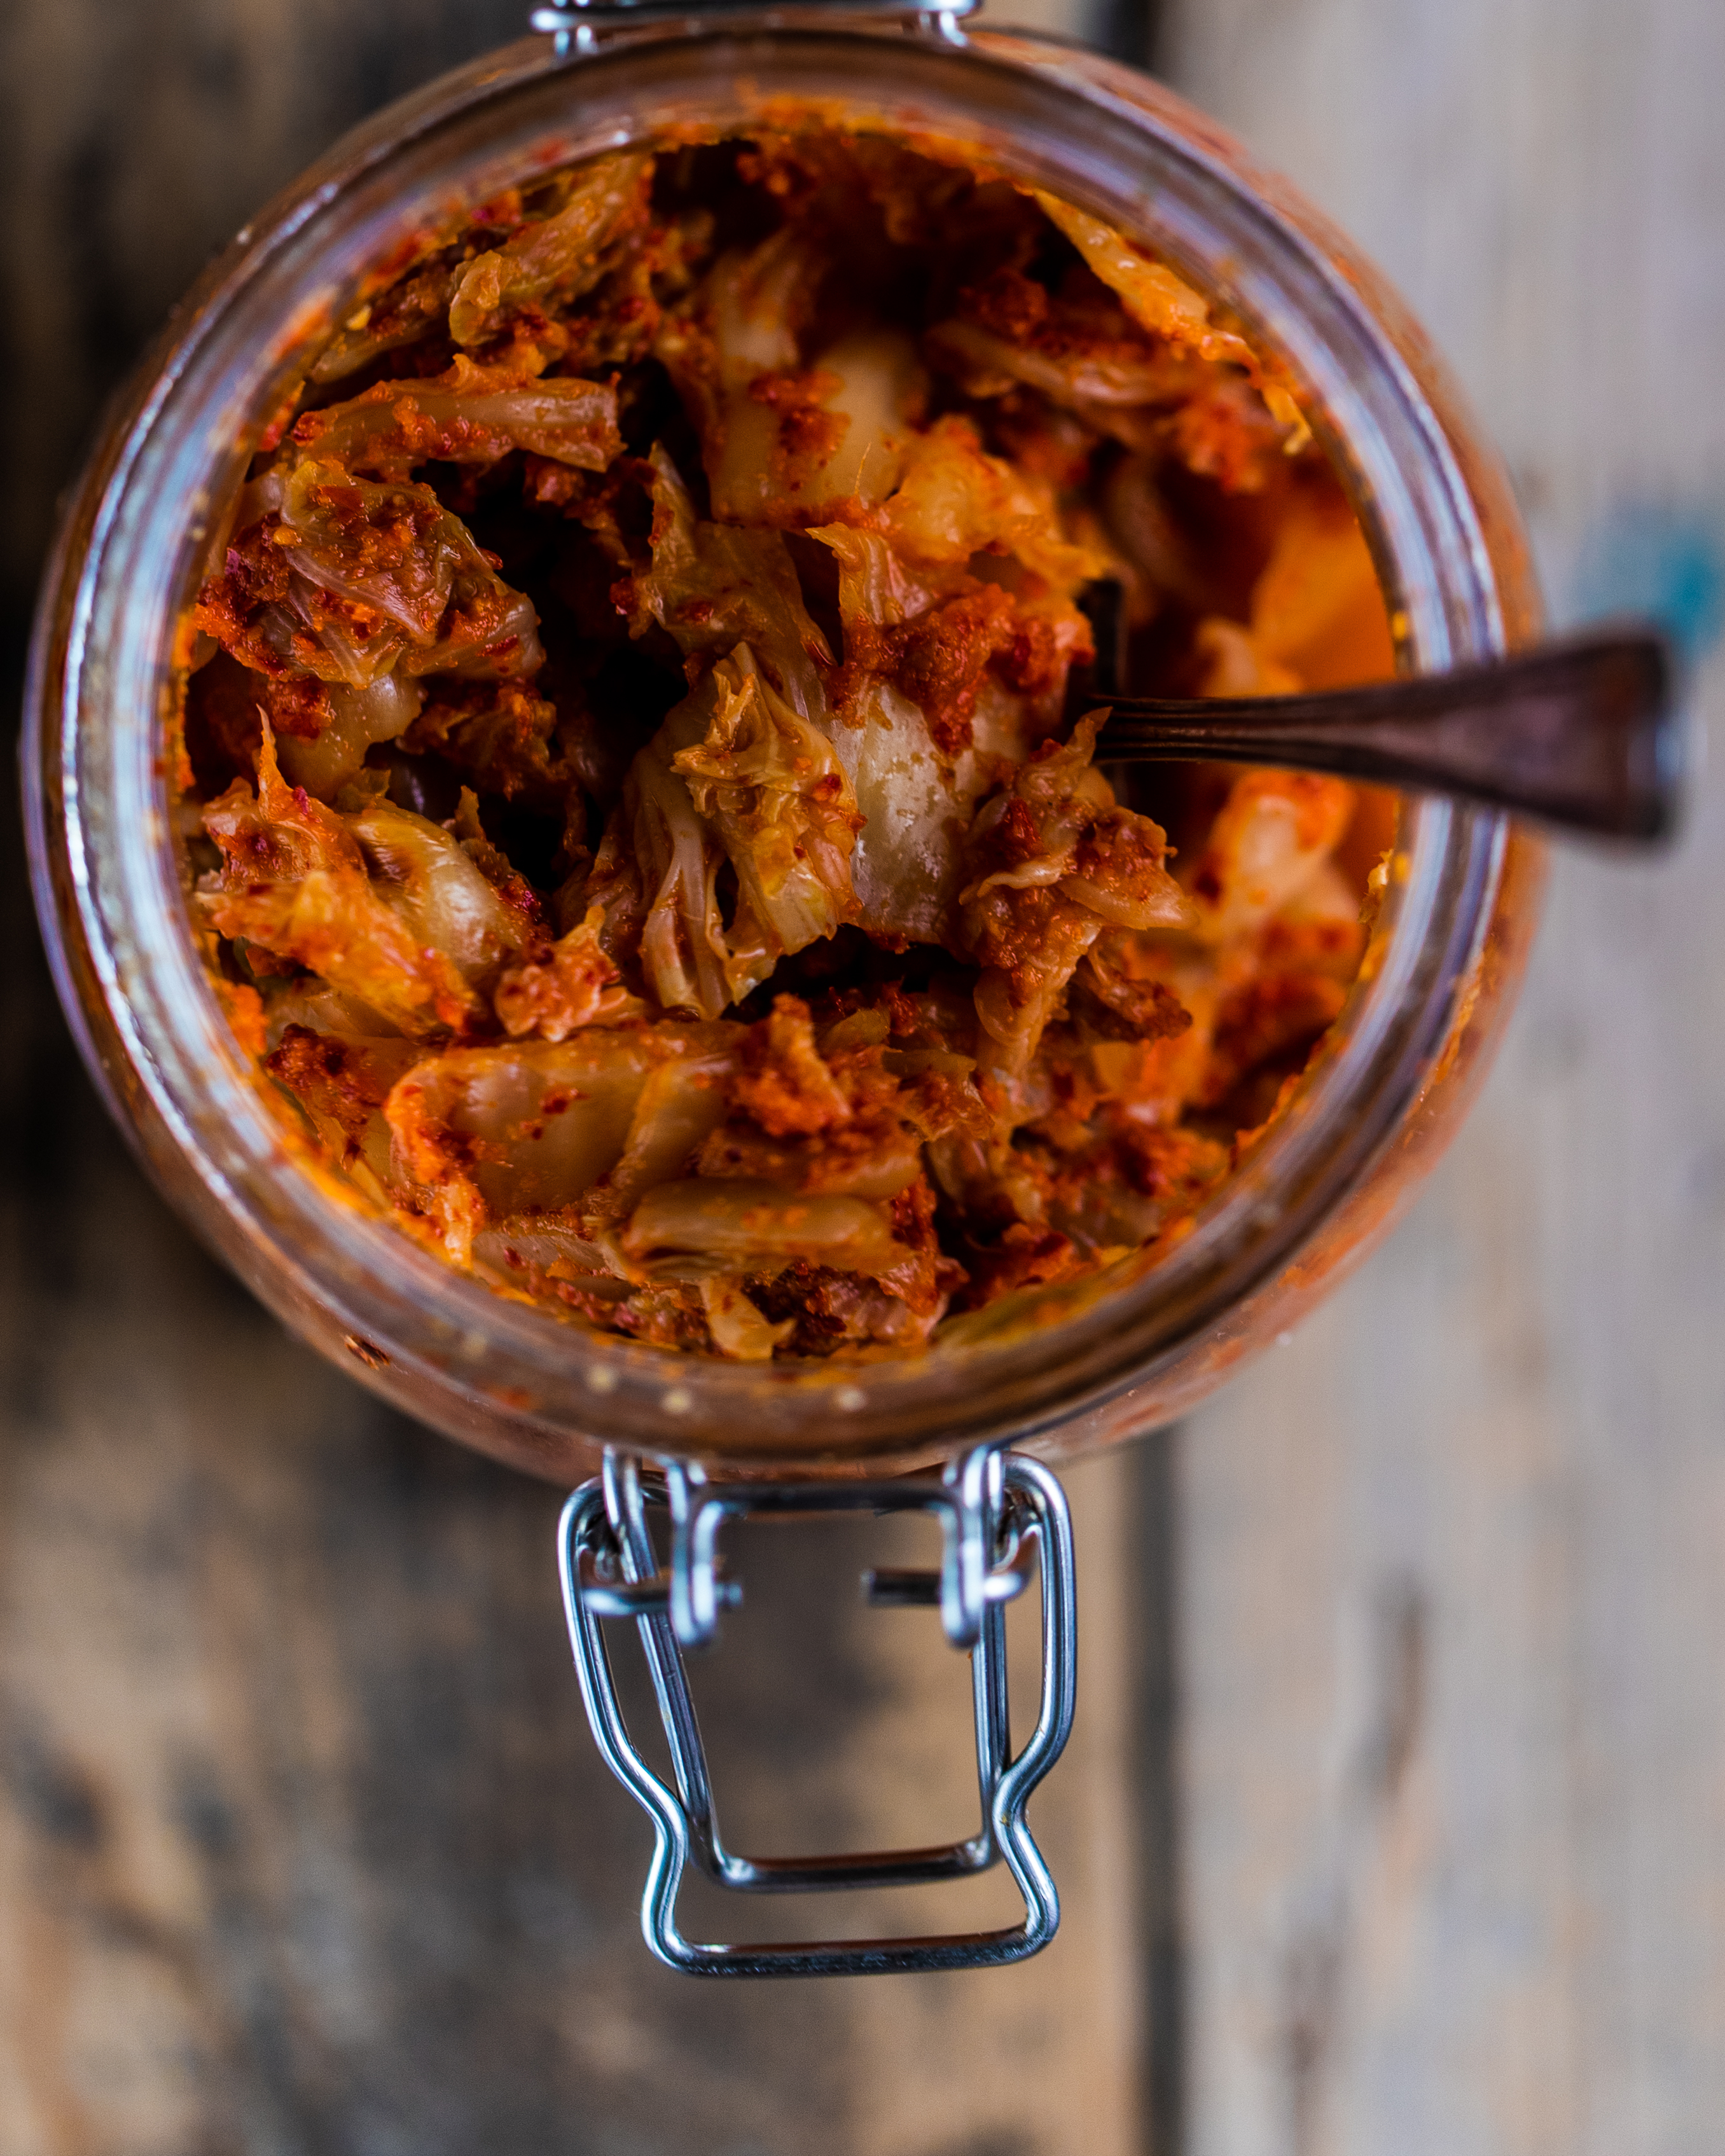 Overhead shot of vegan kimchi in a glass jar on a wooden surface